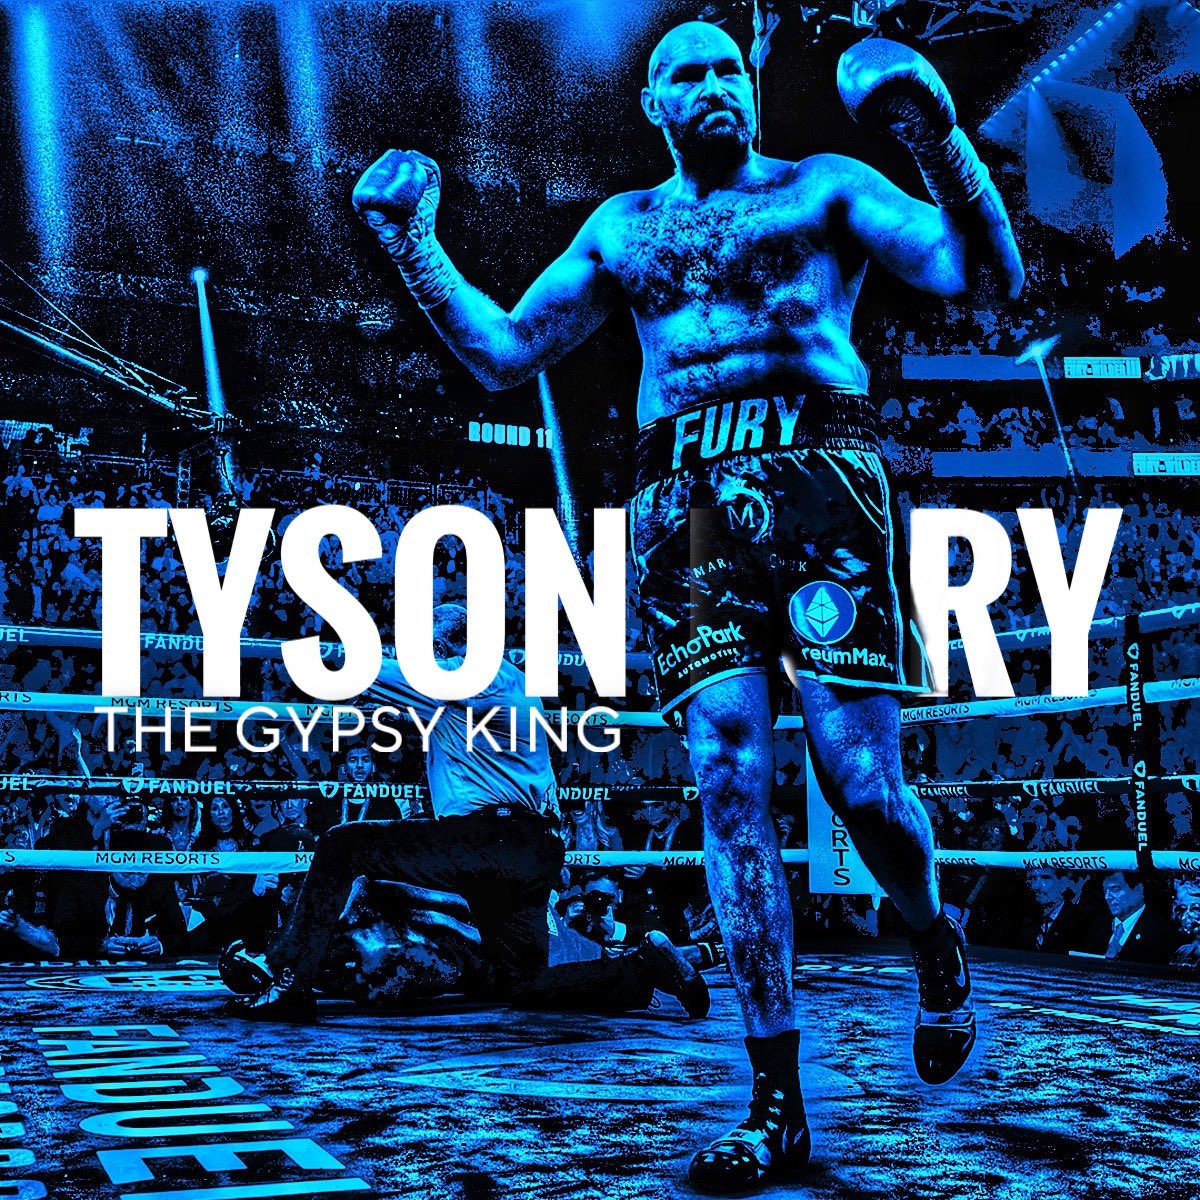 Tyson Fury Design 🥊
Just a simple little design trying to learn and teach myself some stuff 🙏

-
#gypsyking #tysonfury #furyvsjoshua #boxing #boxingnews #boxinggraphics #sportsdesign #smsports #sportsposter #sportsgraphics